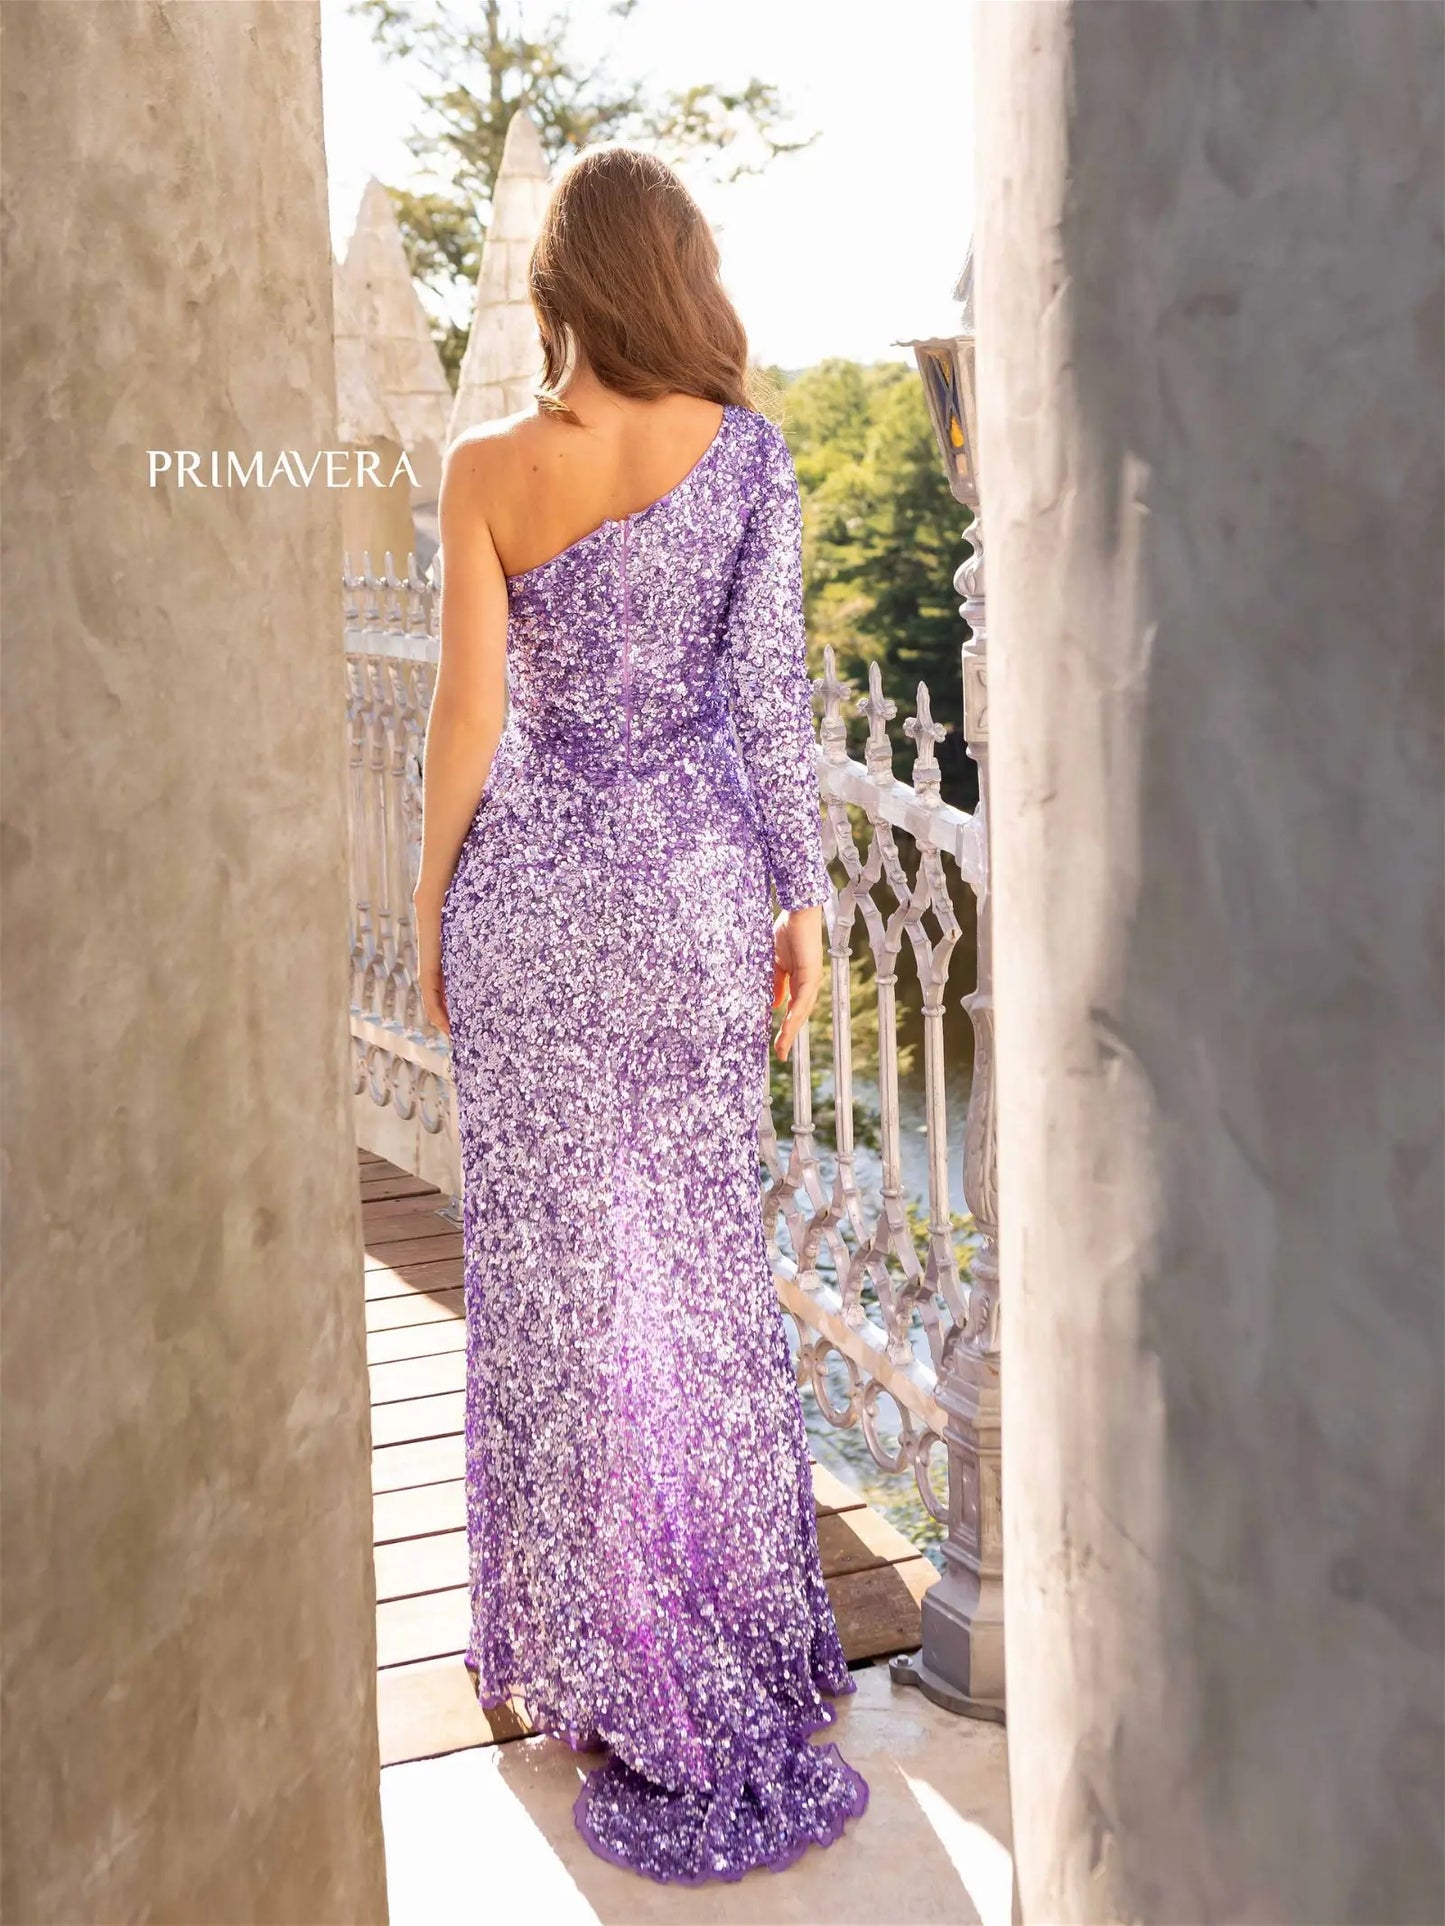 Primavera Couture 3942 Prom Dress Long Beaded Gown. This Gown has such a beautiful slit plus a long sleeve.